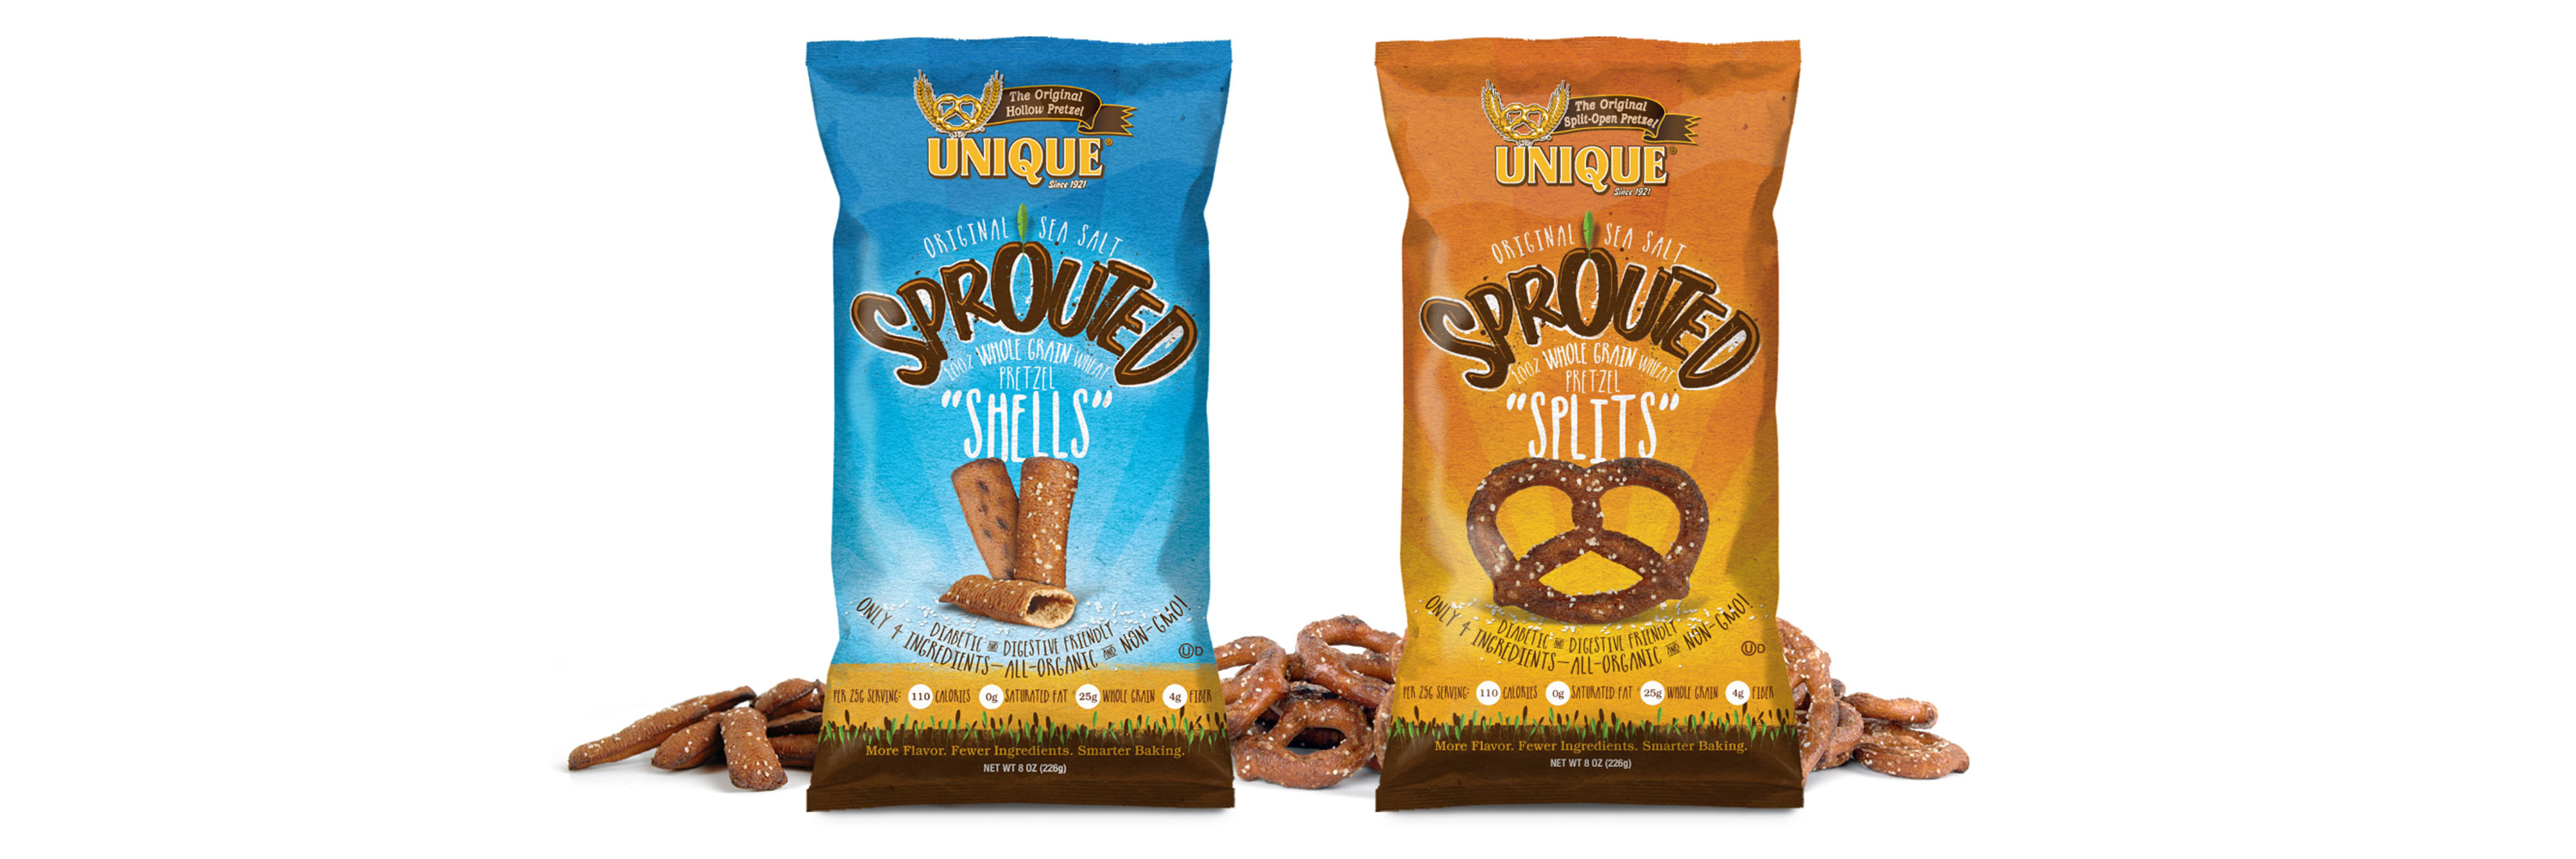 Snack Food Product Packaging and Point of Purchase Design